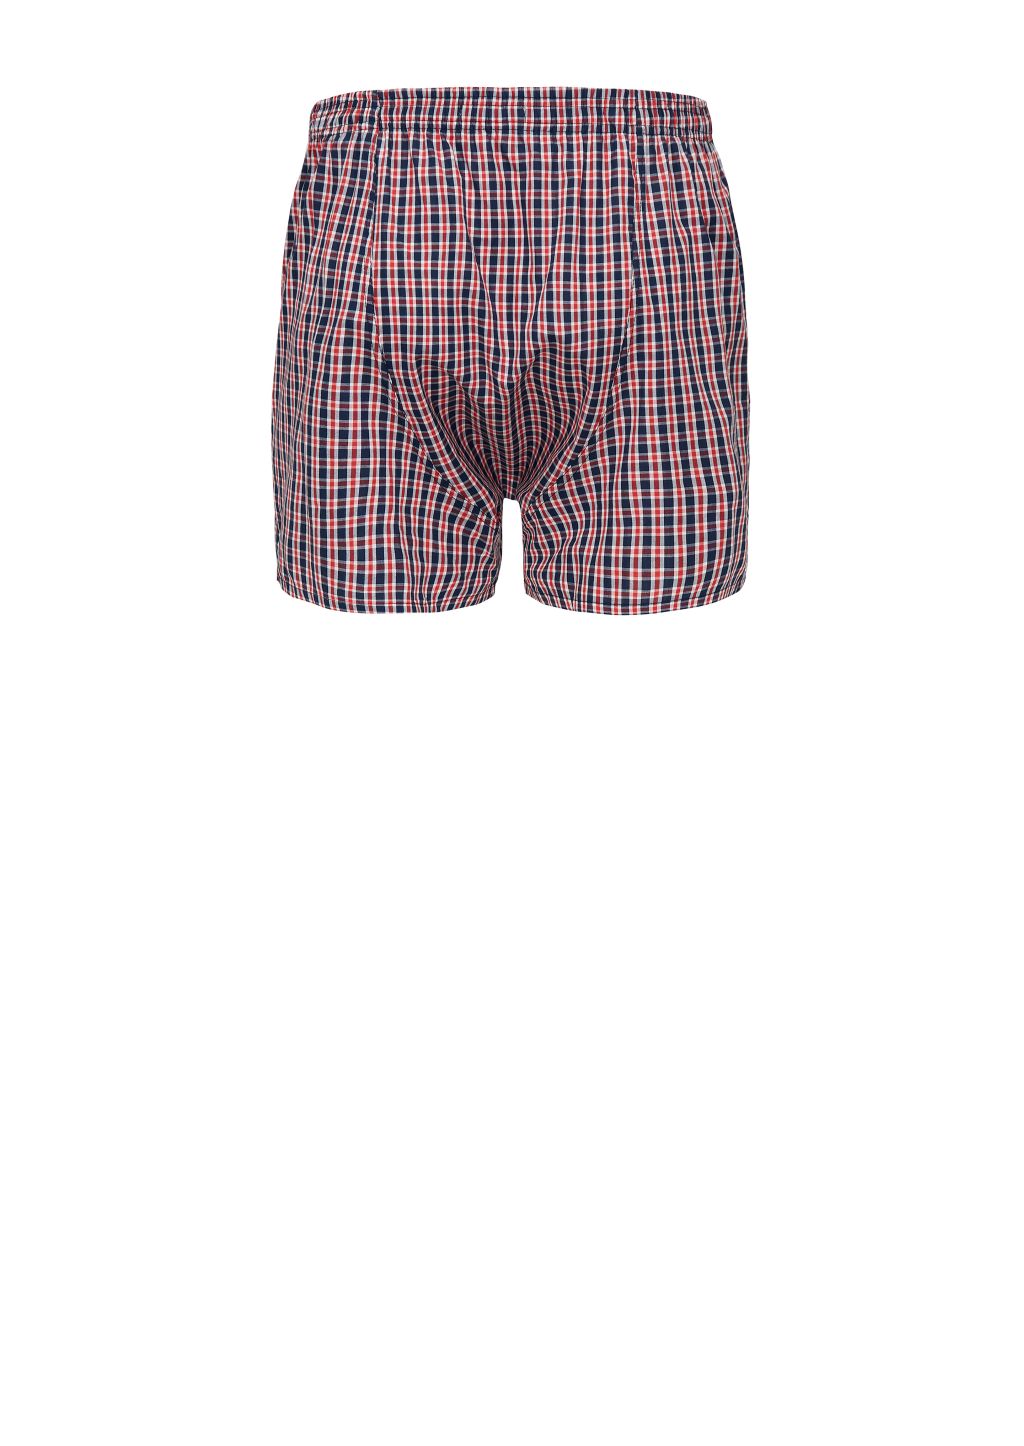 Männer Boxershorts #Checked Blue/White/Red Checked S